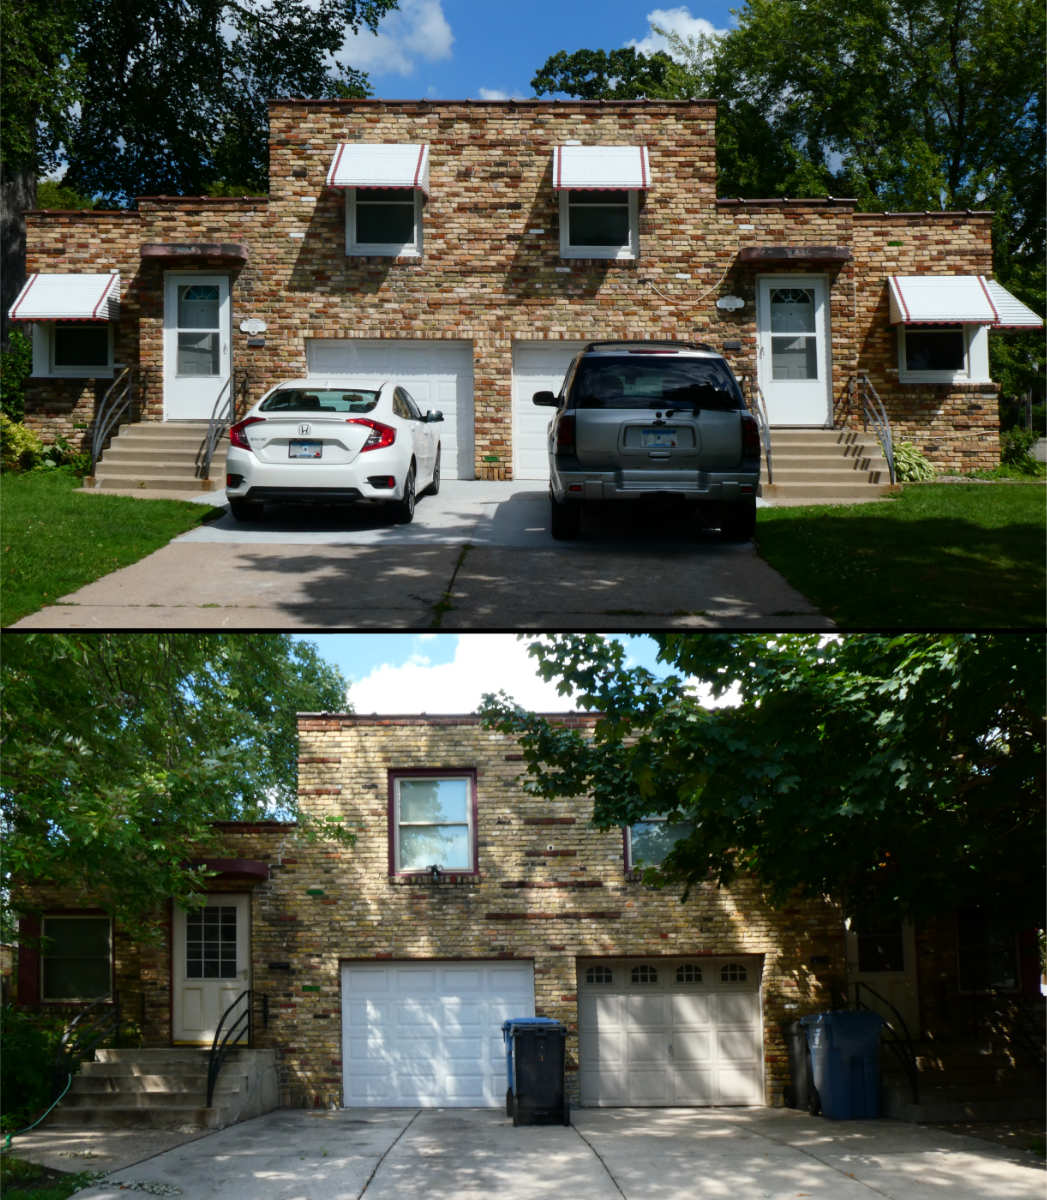 two stacked images of brick buildings with side by side, garages and doors.